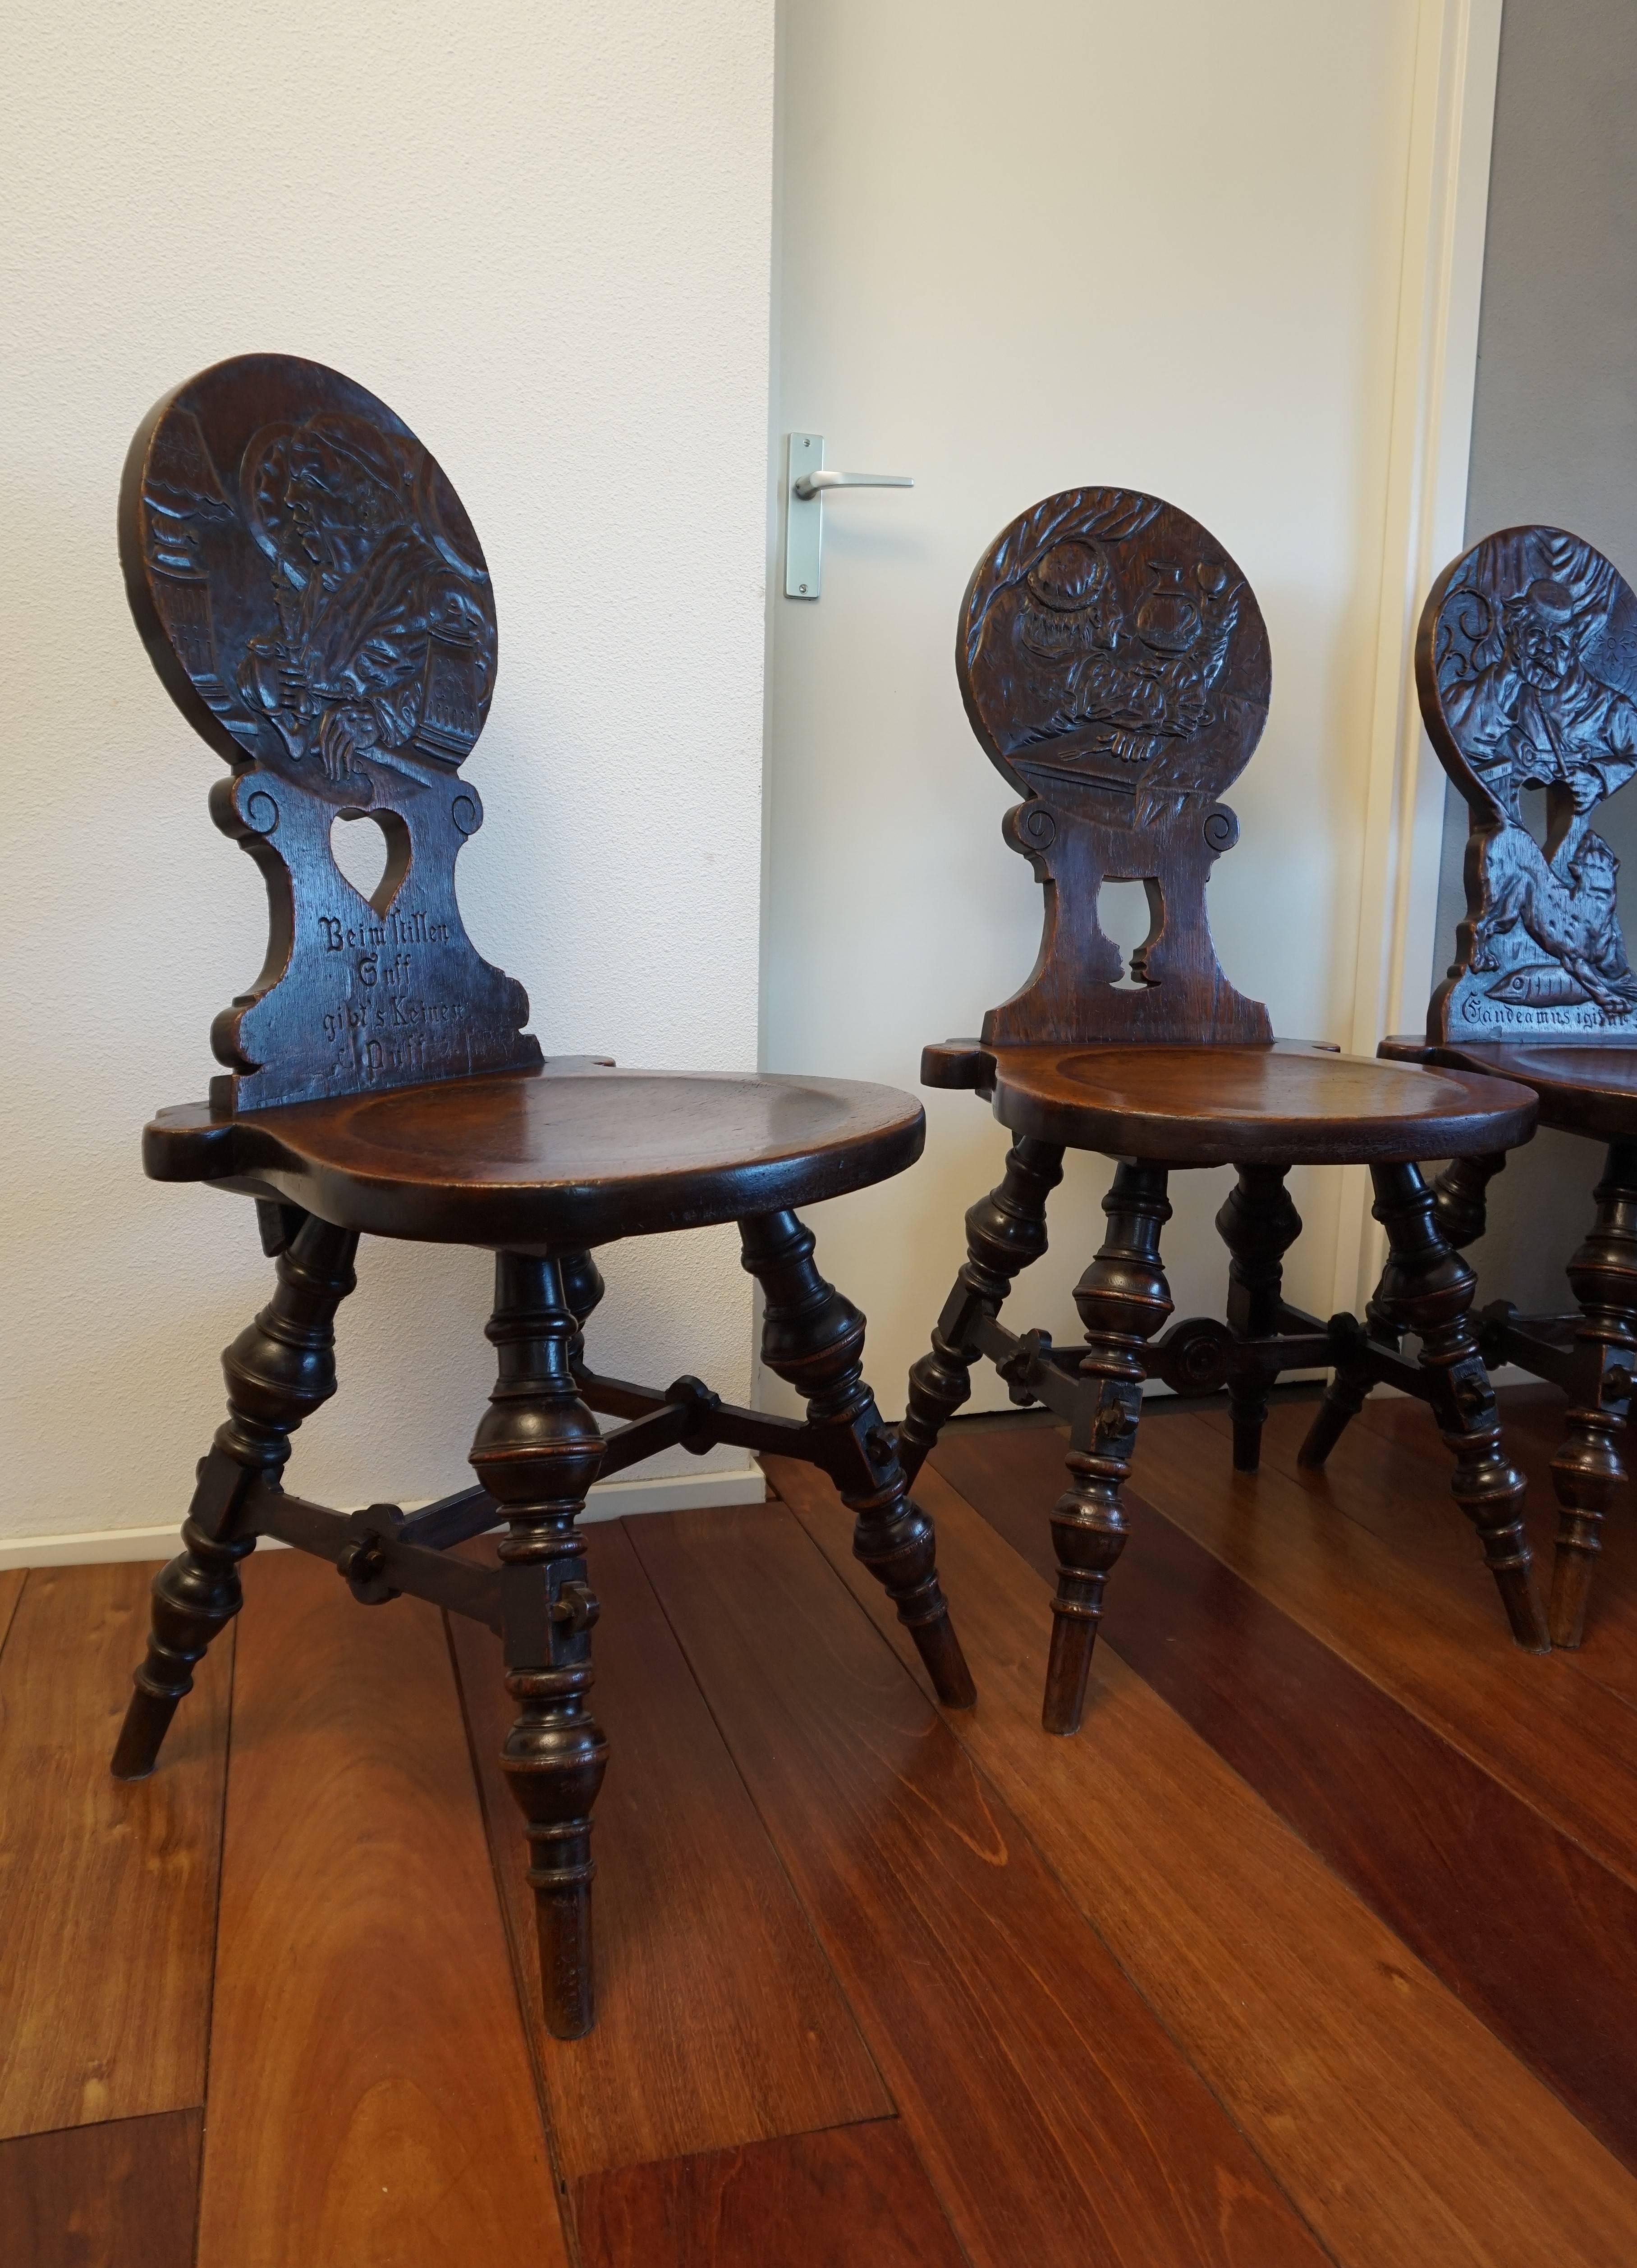 Six Antique & Hand-Carved German Tavern / Drinking Chairs with Aphorisms Sayings 1